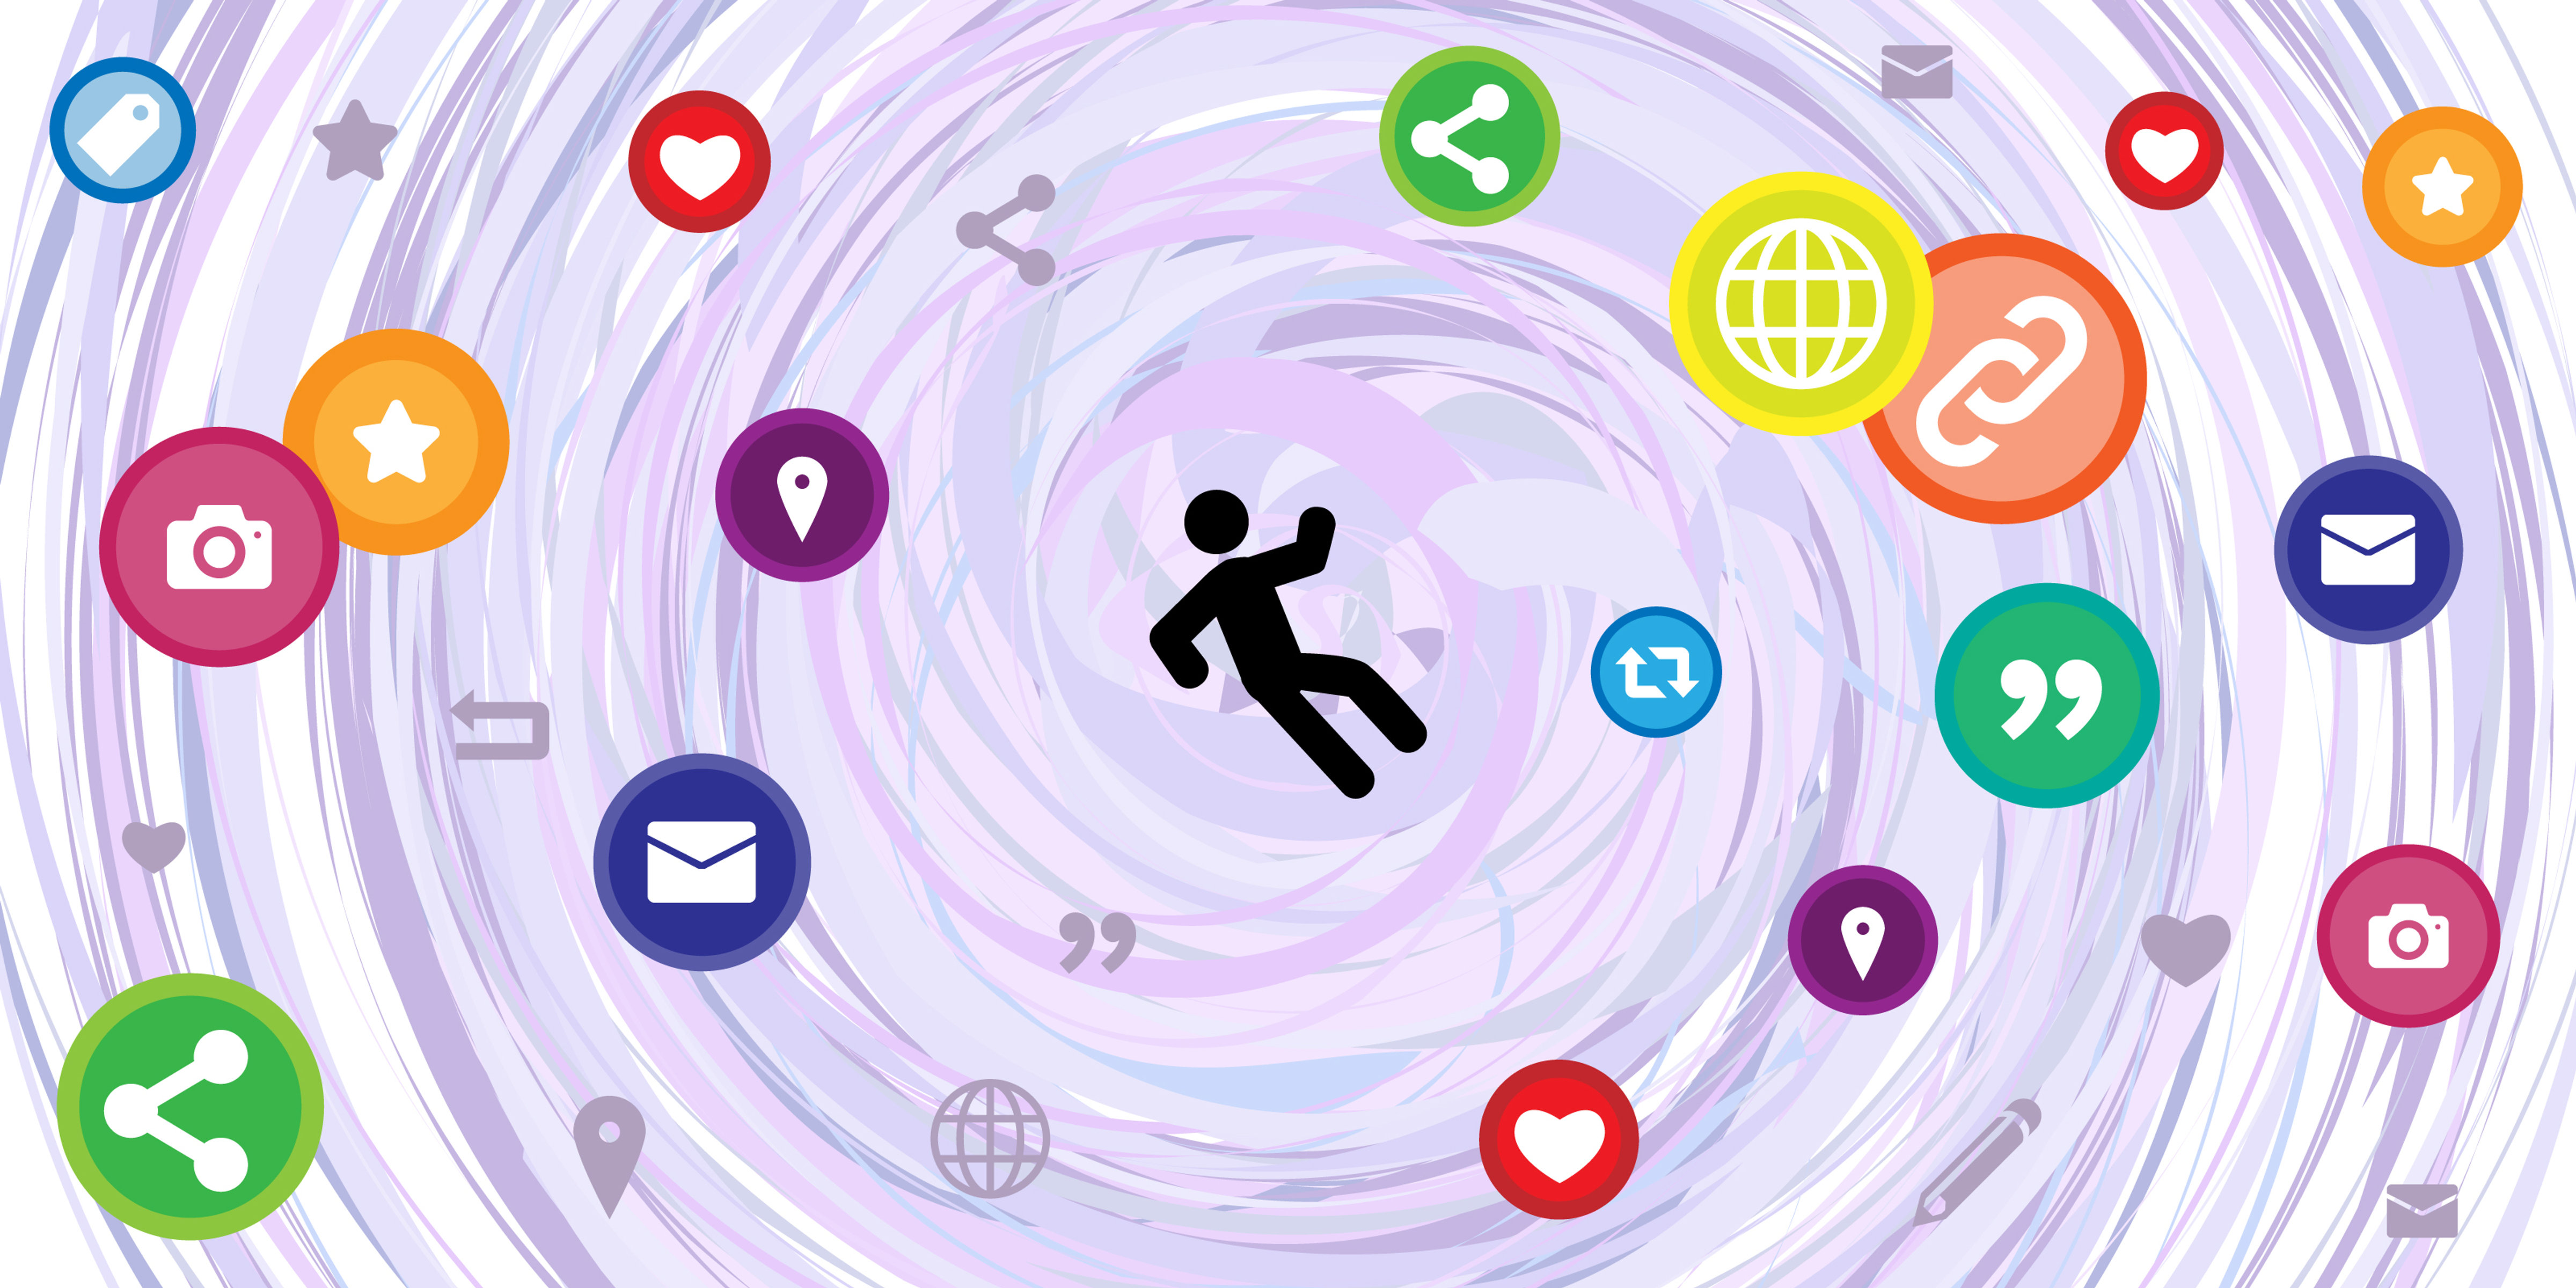 Person in a spiral of app icons